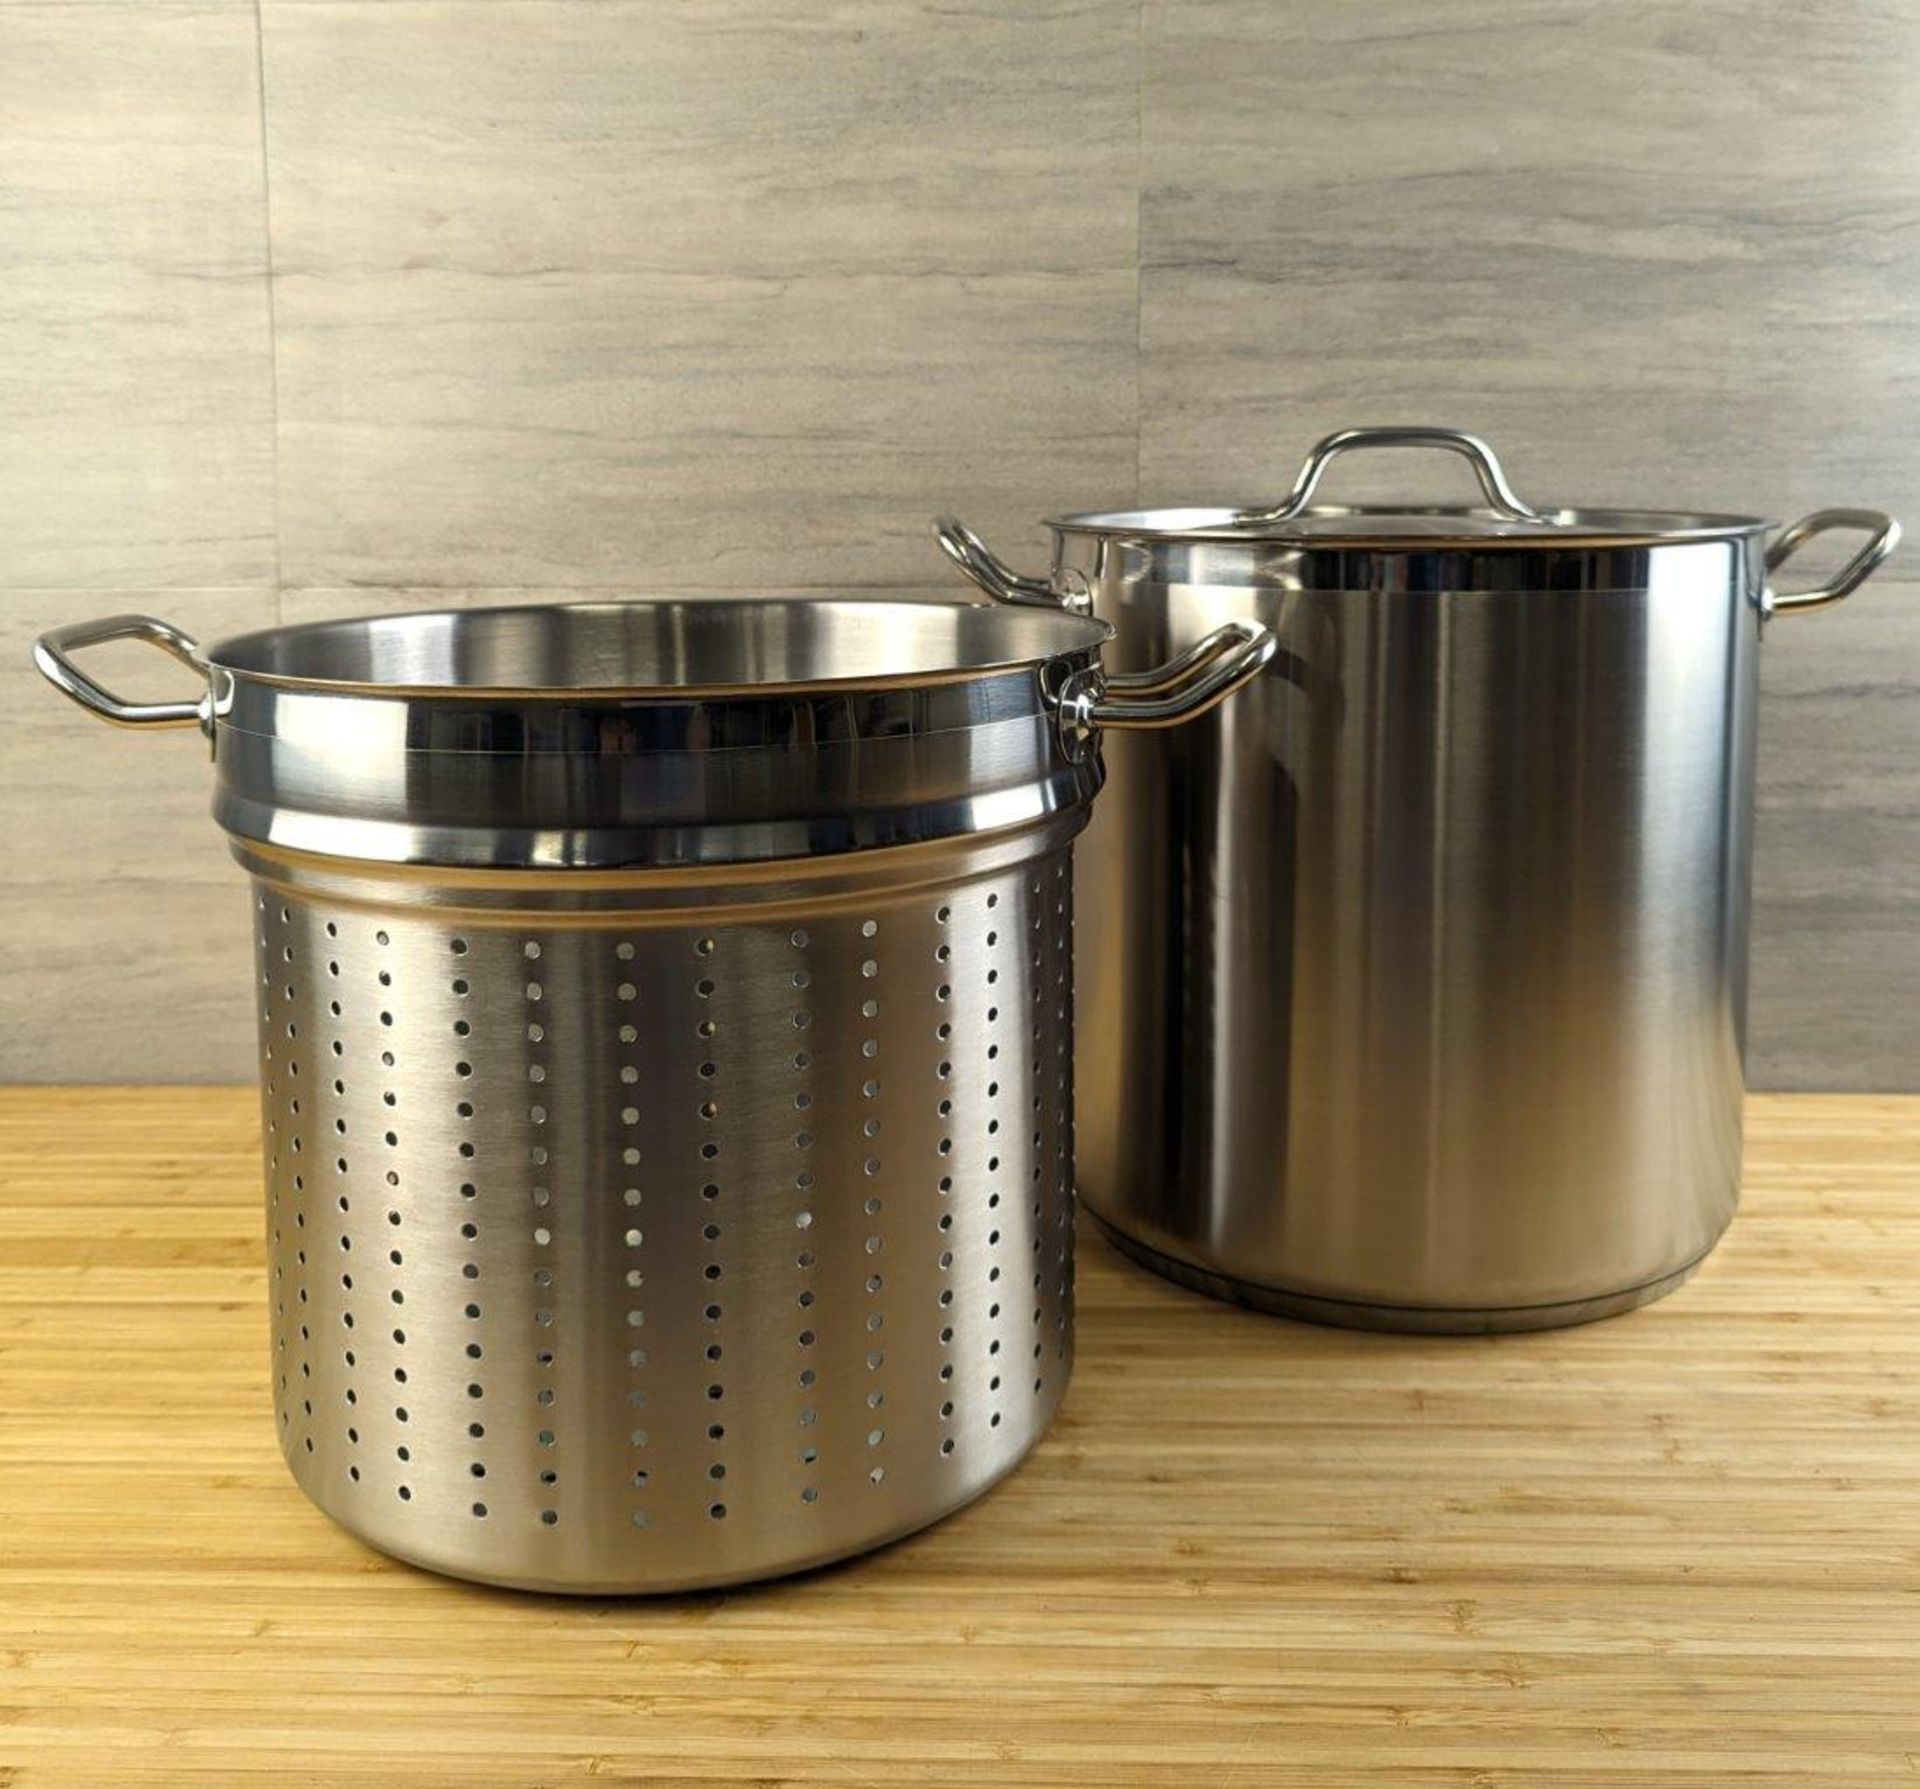 24QT STOCK POT AND LID WITH STEAM INSERT, INDUCTION CAPABLE - LOT OF 3 PIECES